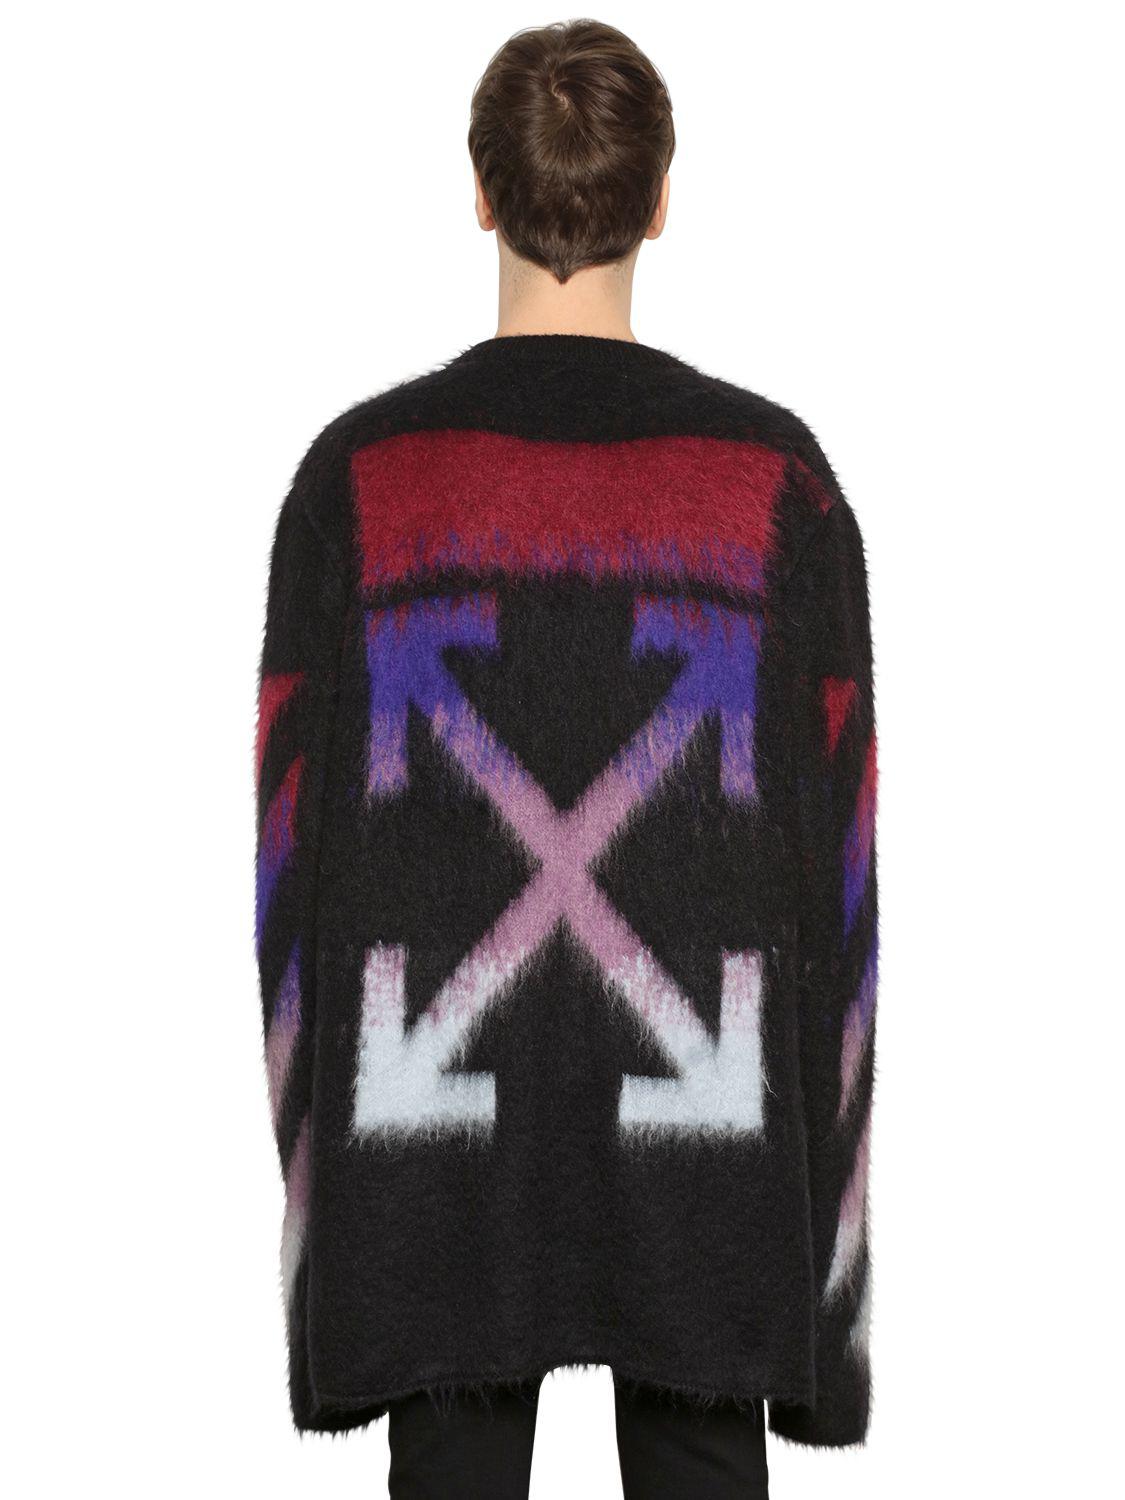 Off-White c/o Virgil Abloh Arrows Mohair & Cashmere Sweater in 